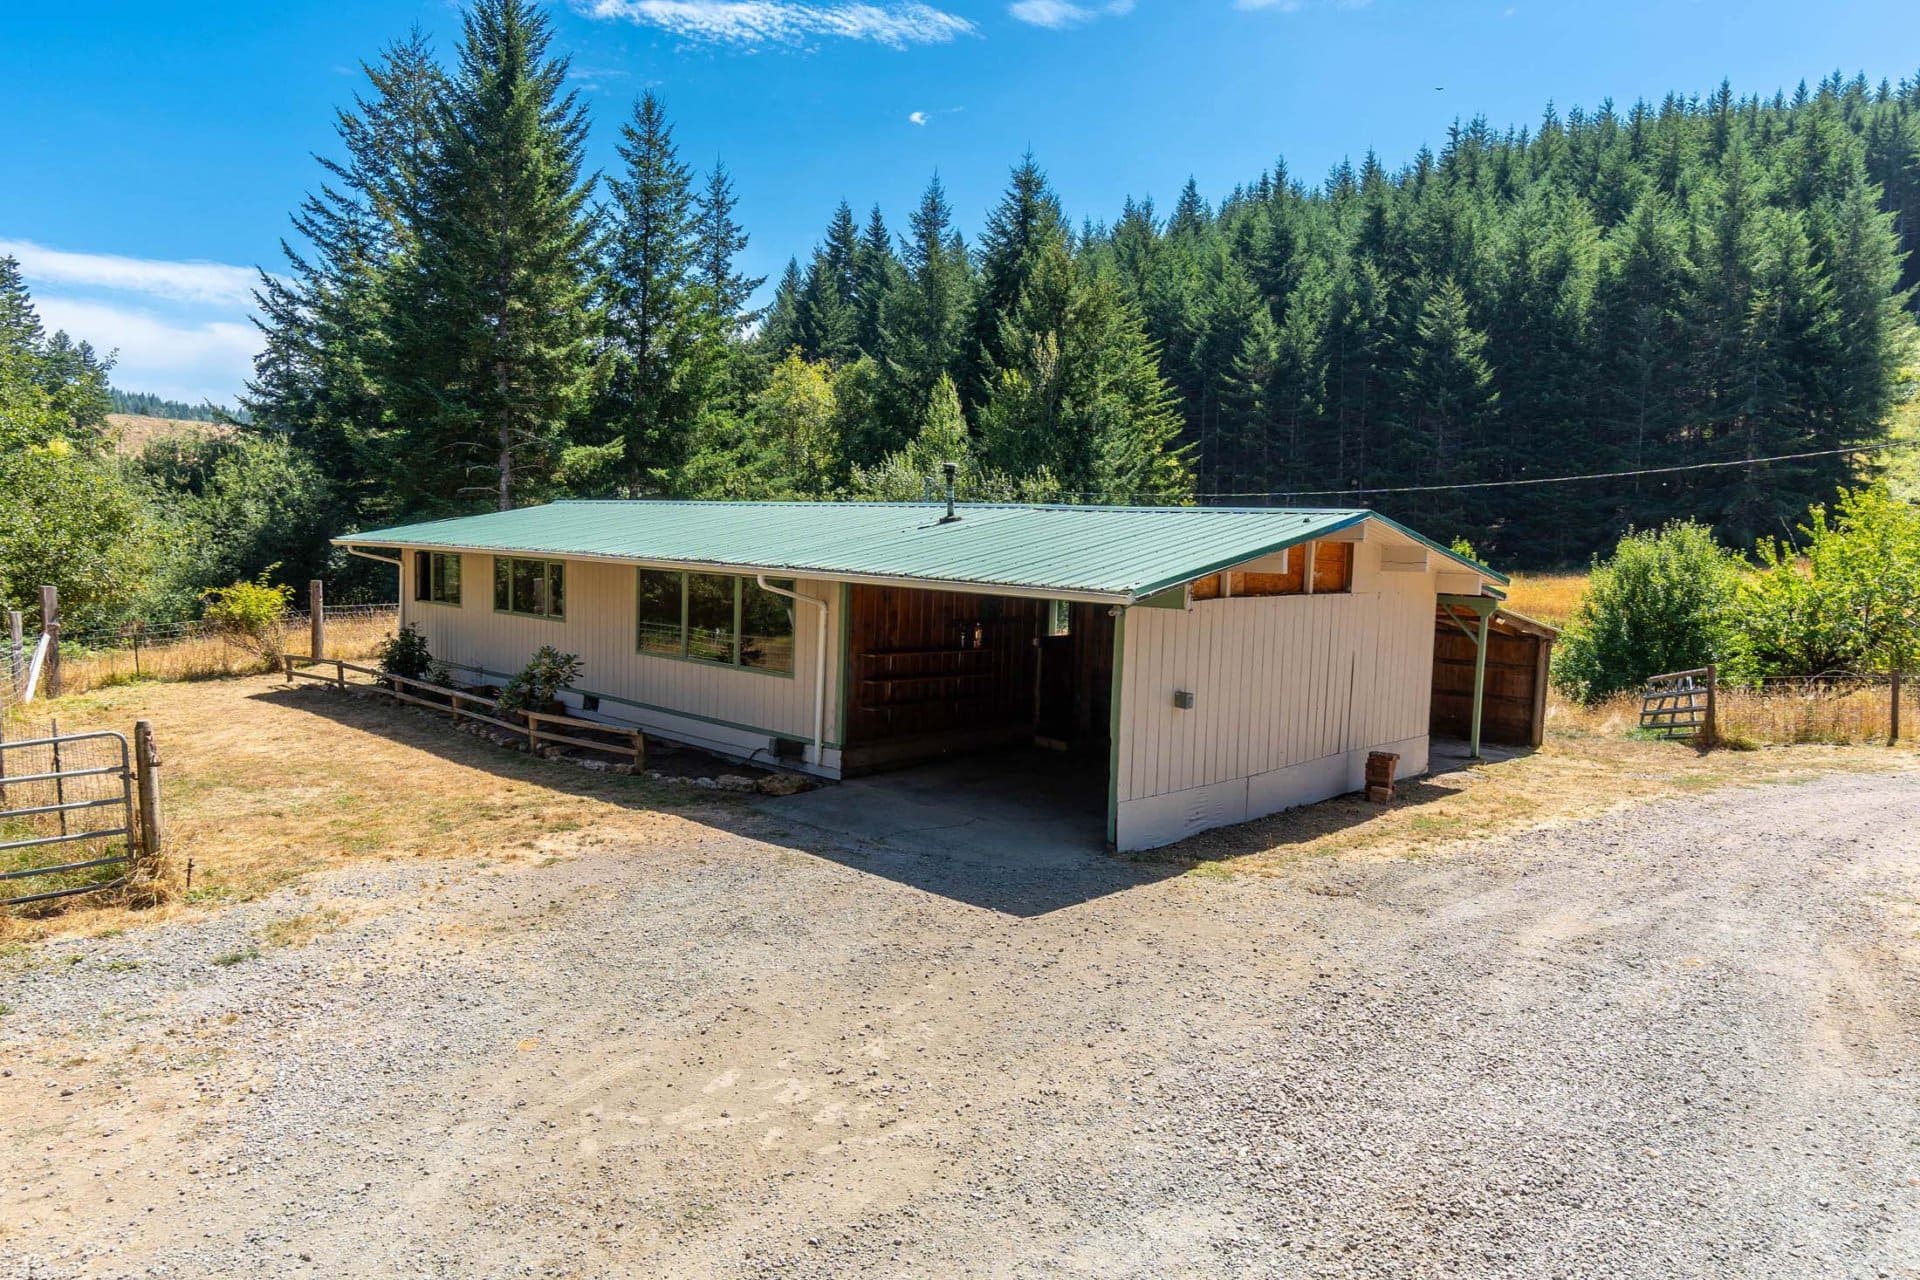 Second house back Oregon Upstream Timber and Cattle Ranch